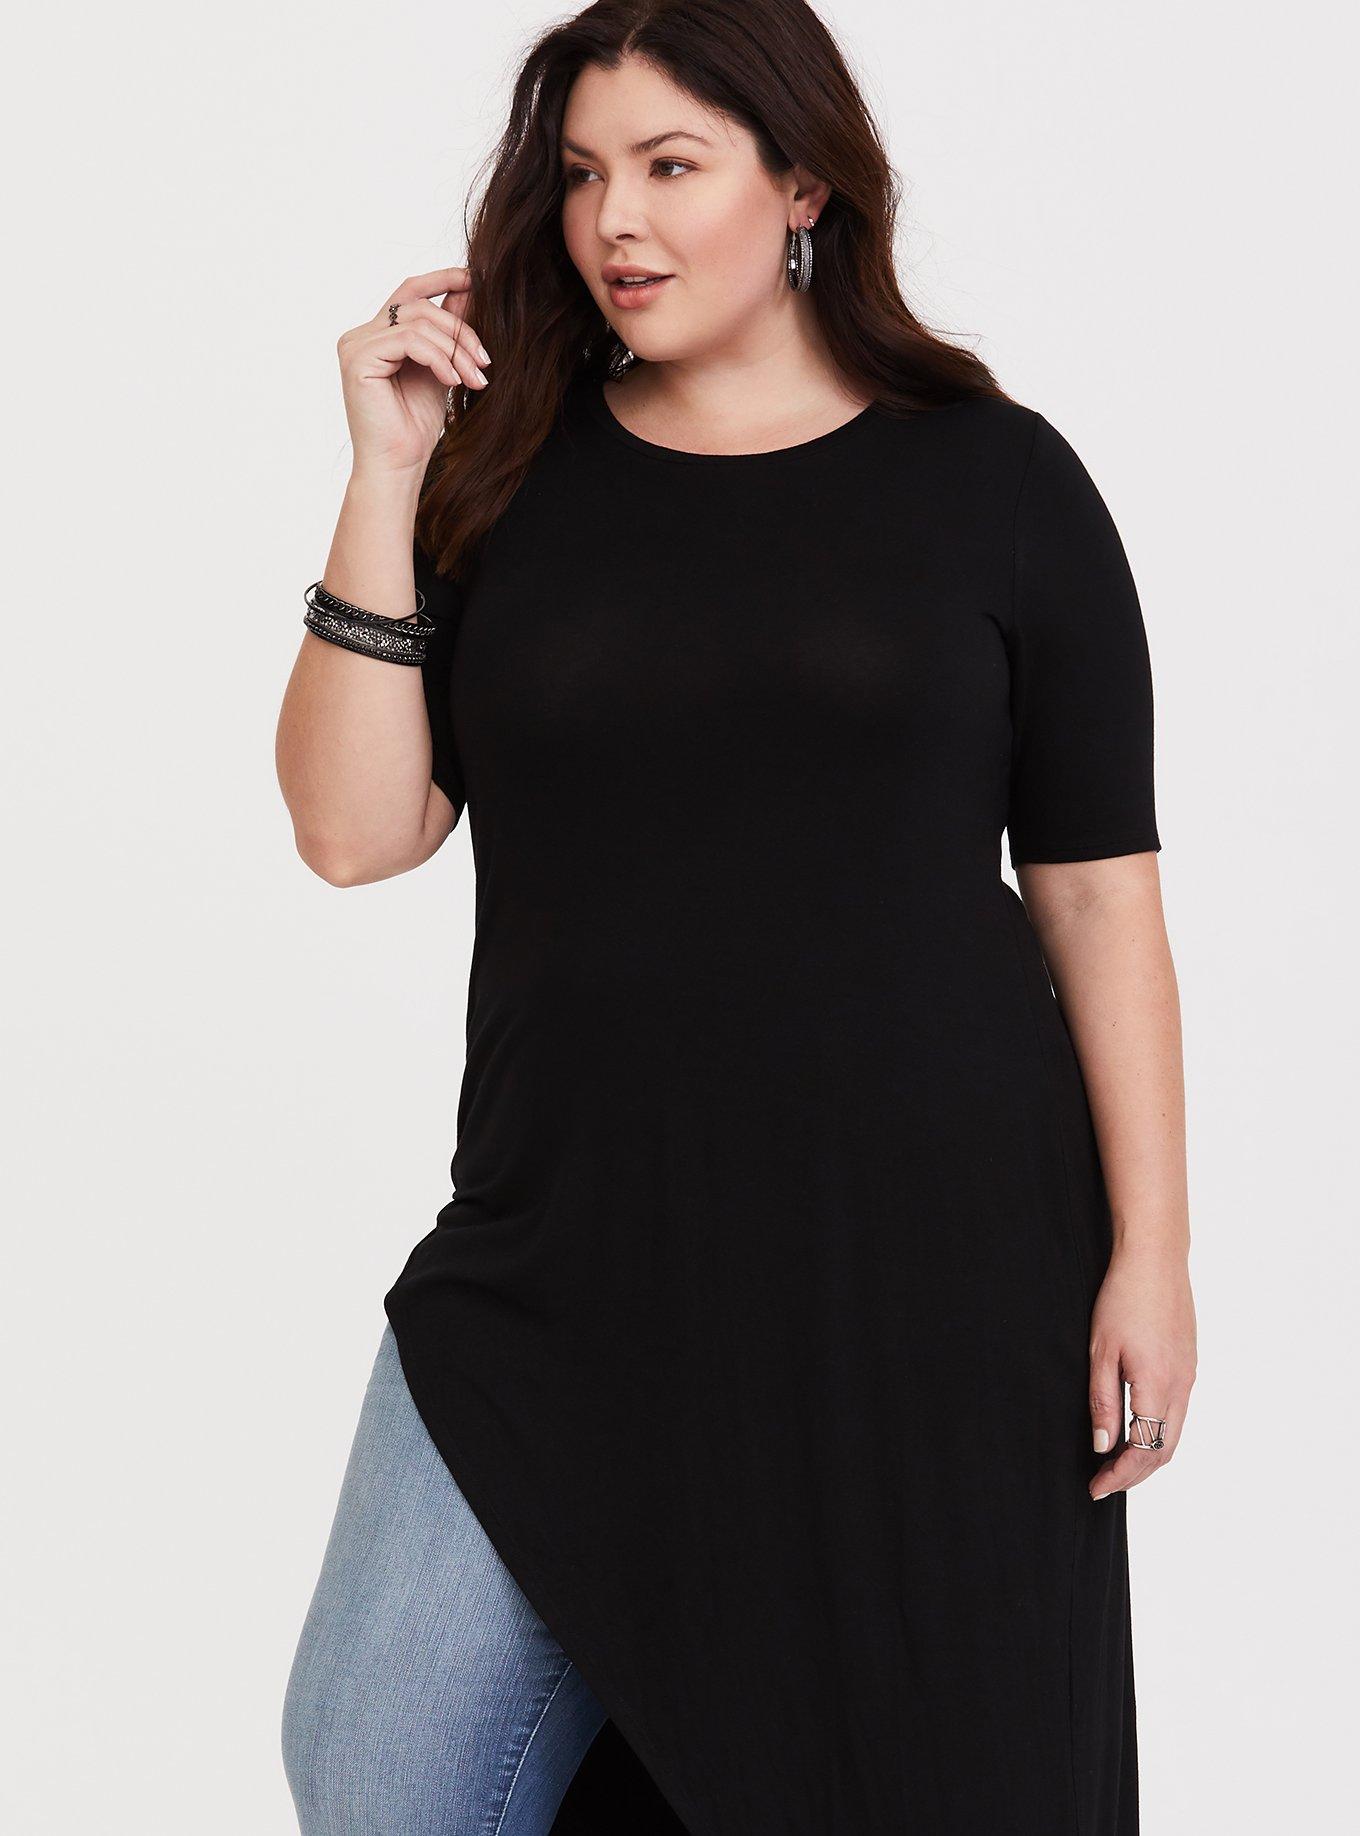 Plus Size - Super Soft Crew Knotted Asymmetrical Tunic Tee - Torrid